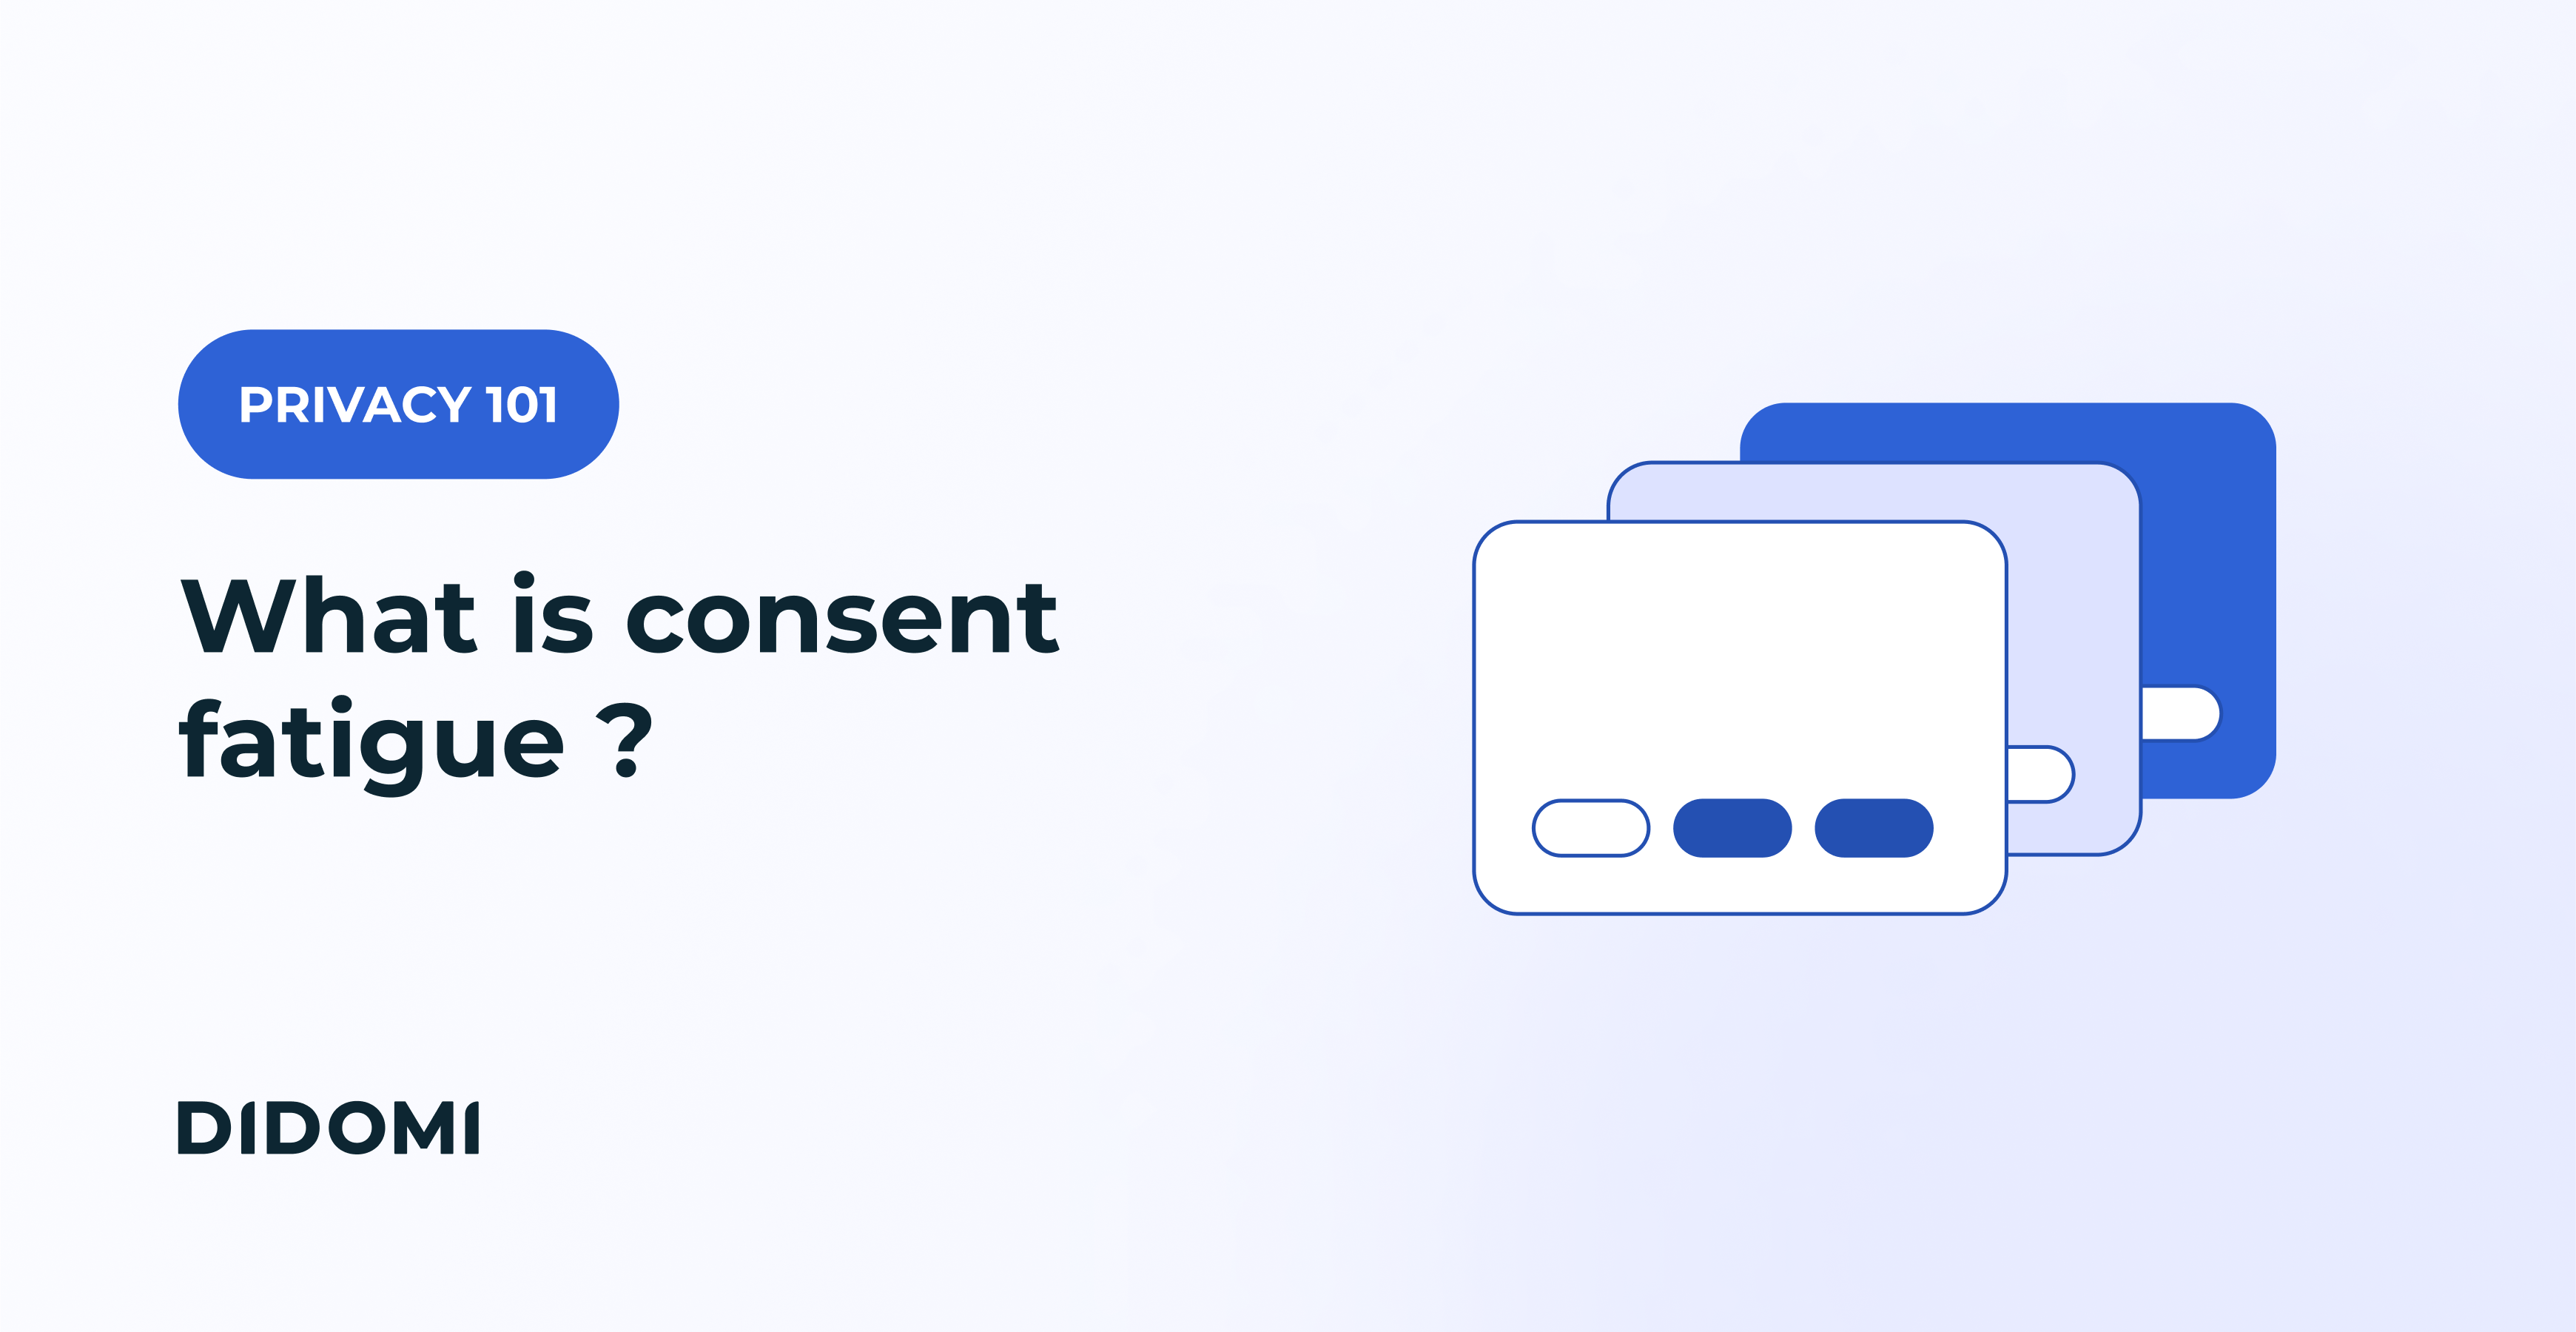 The text "What is consent fatigue" with the mention "Privacy 101" on the left side of the image, with an illustration on the right representing many overlapping consent banners on top of one another